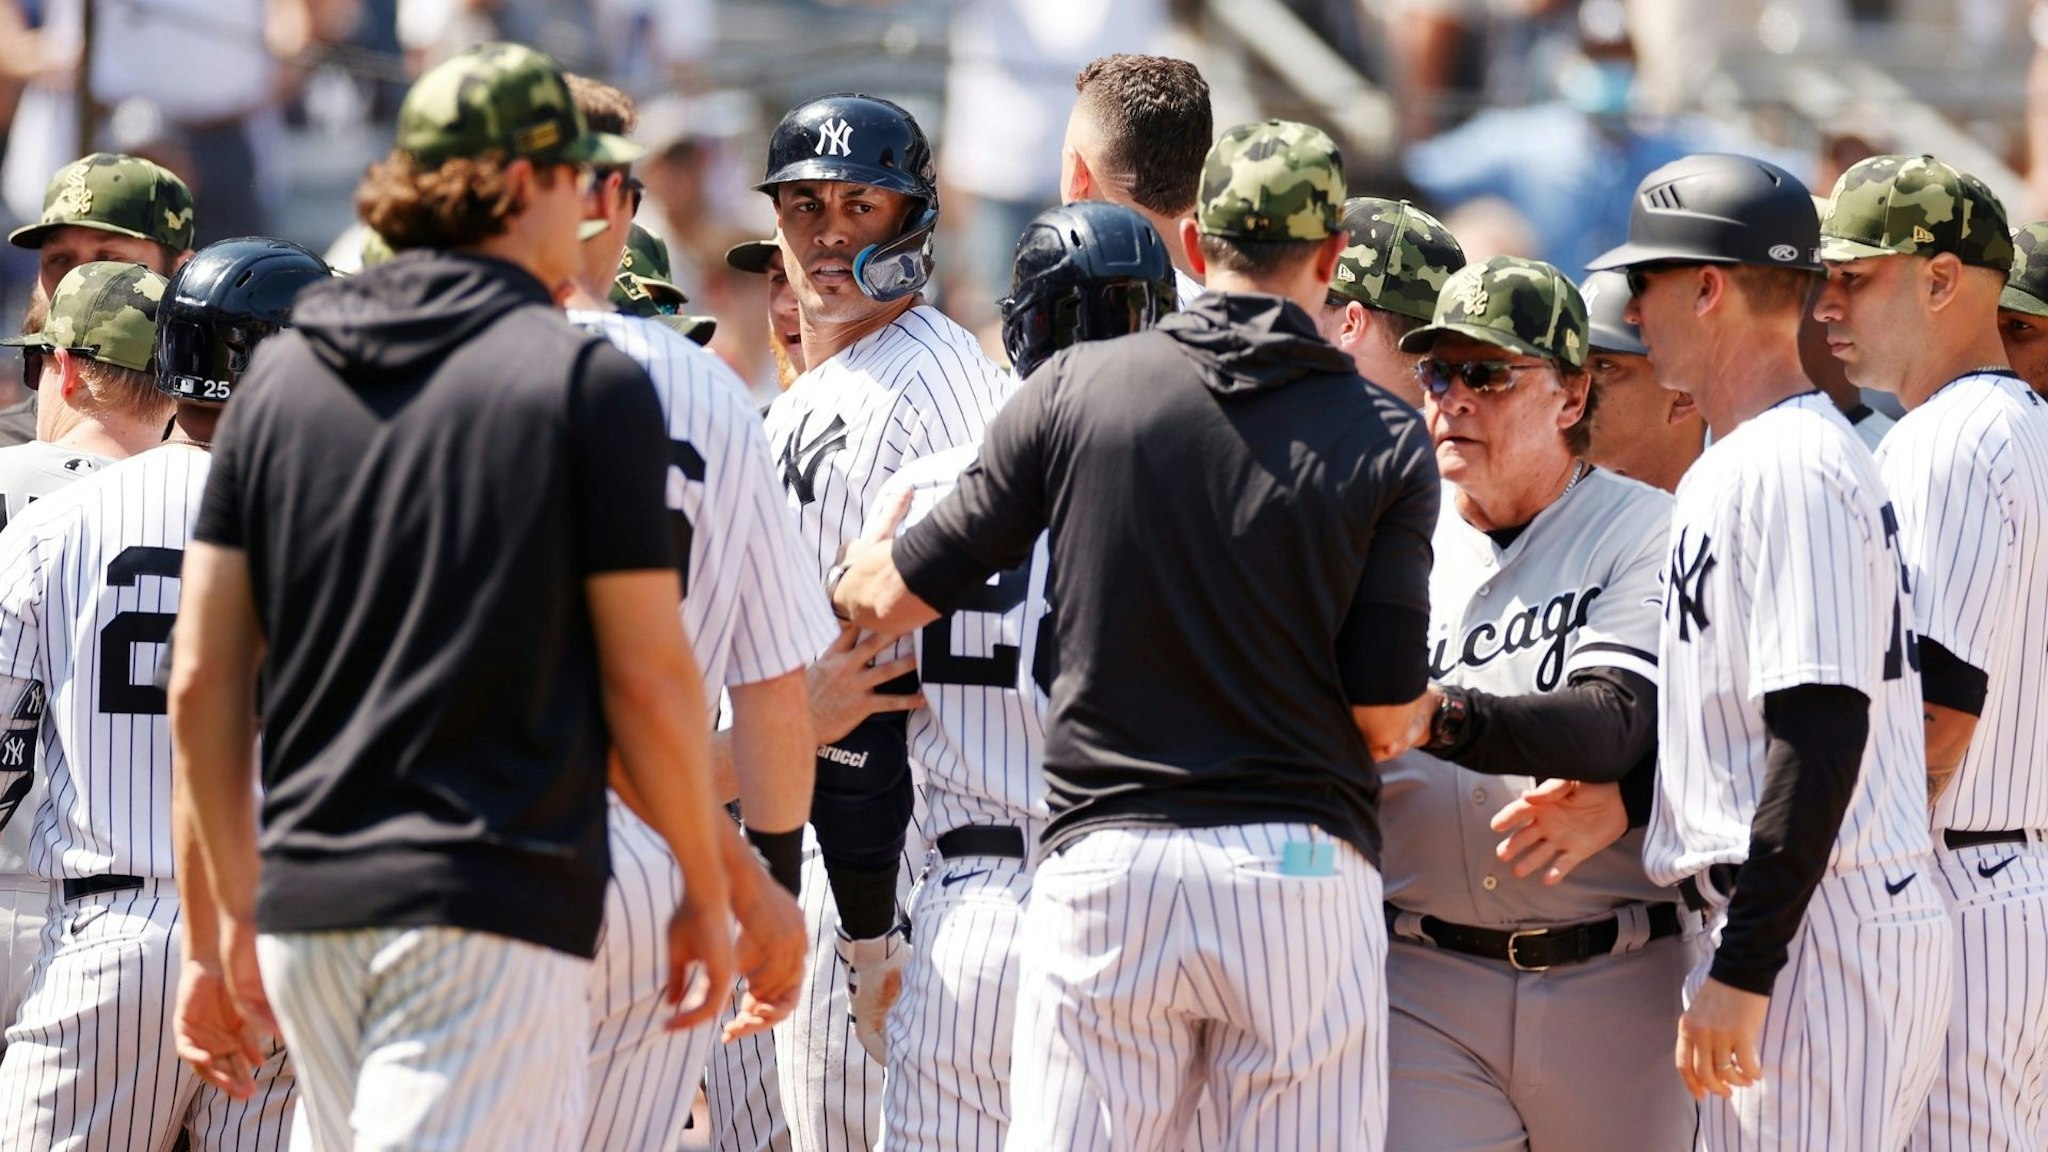 NEW YORK, NEW YORK - MAY 21: The benches clear after a dispute between Yasmani Grandal #24 of the Chicago White Sox and Josh Donaldson #28 of the New York Yankees during the fifth inning against the Chicago White Sox at Yankee Stadium on May 21, 2022 in the Bronx borough of New York City